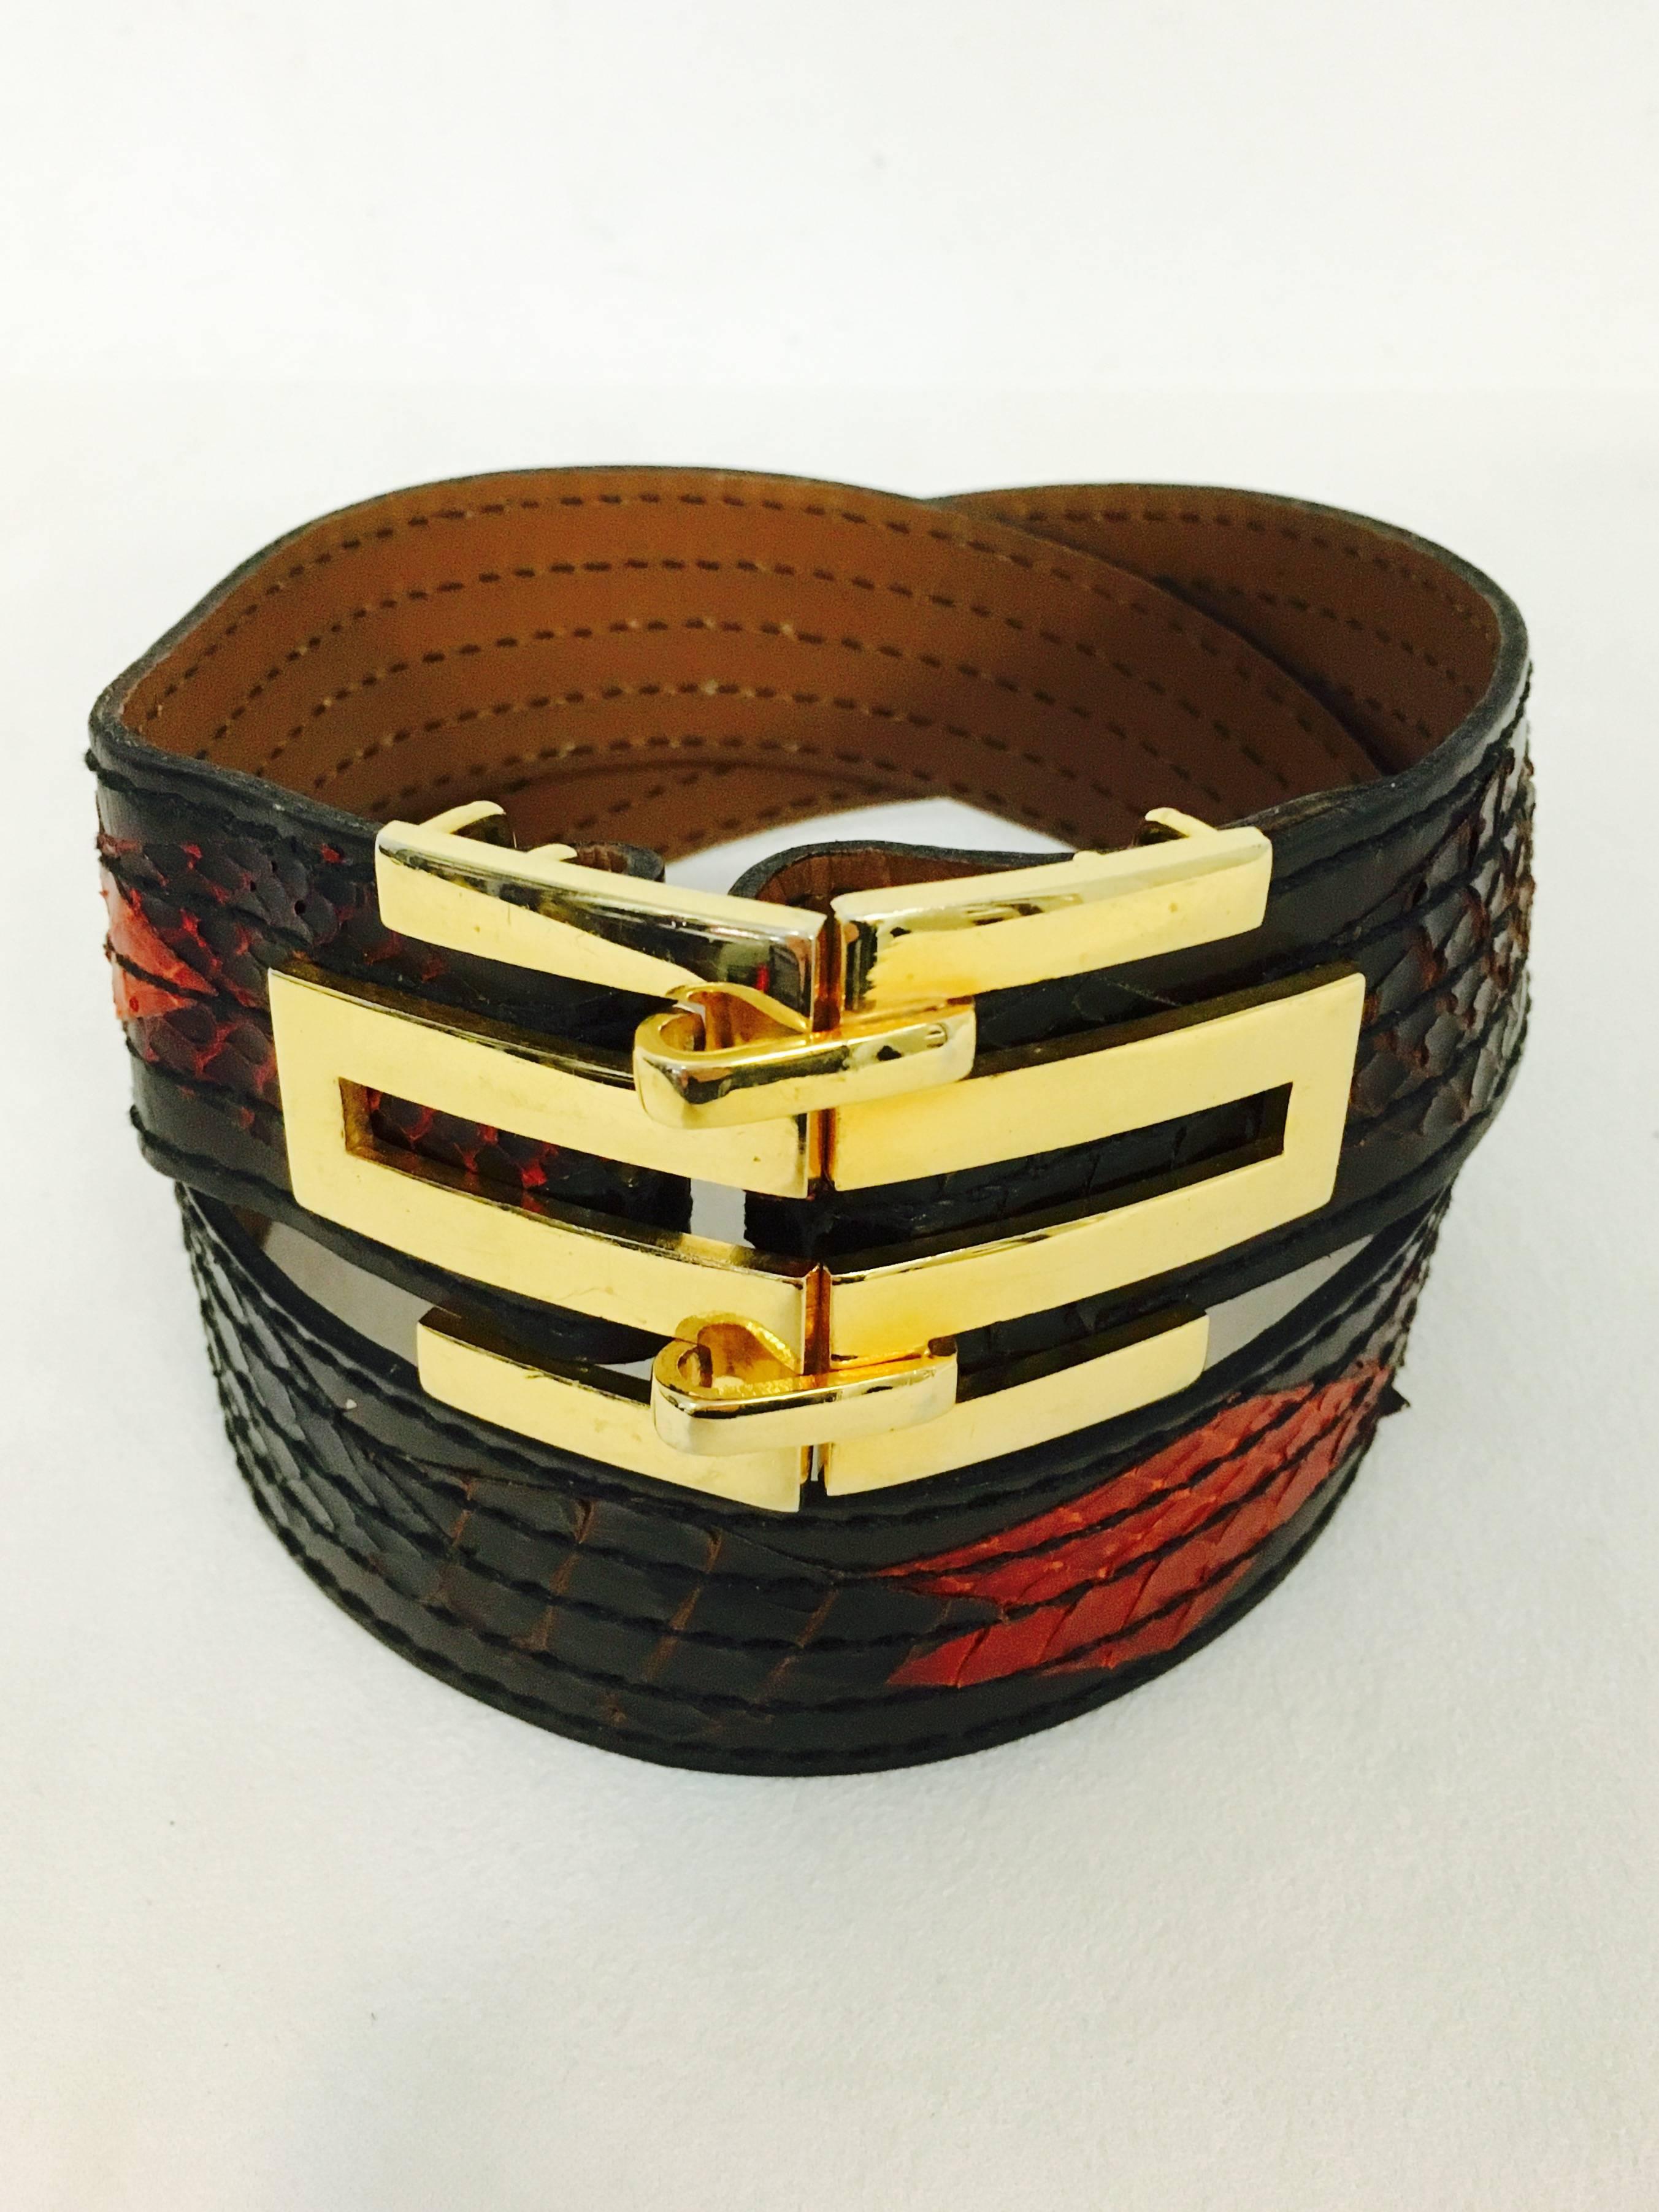 Vintage Gold Tone Christian Dior Leather Belt is a must for any connoisseur of this legendary couturier!  Chocolate leather is made fabulous with multiple geometric python skins in a variety of colors including Bordeaux, Black, Forest, Orange.  Tan